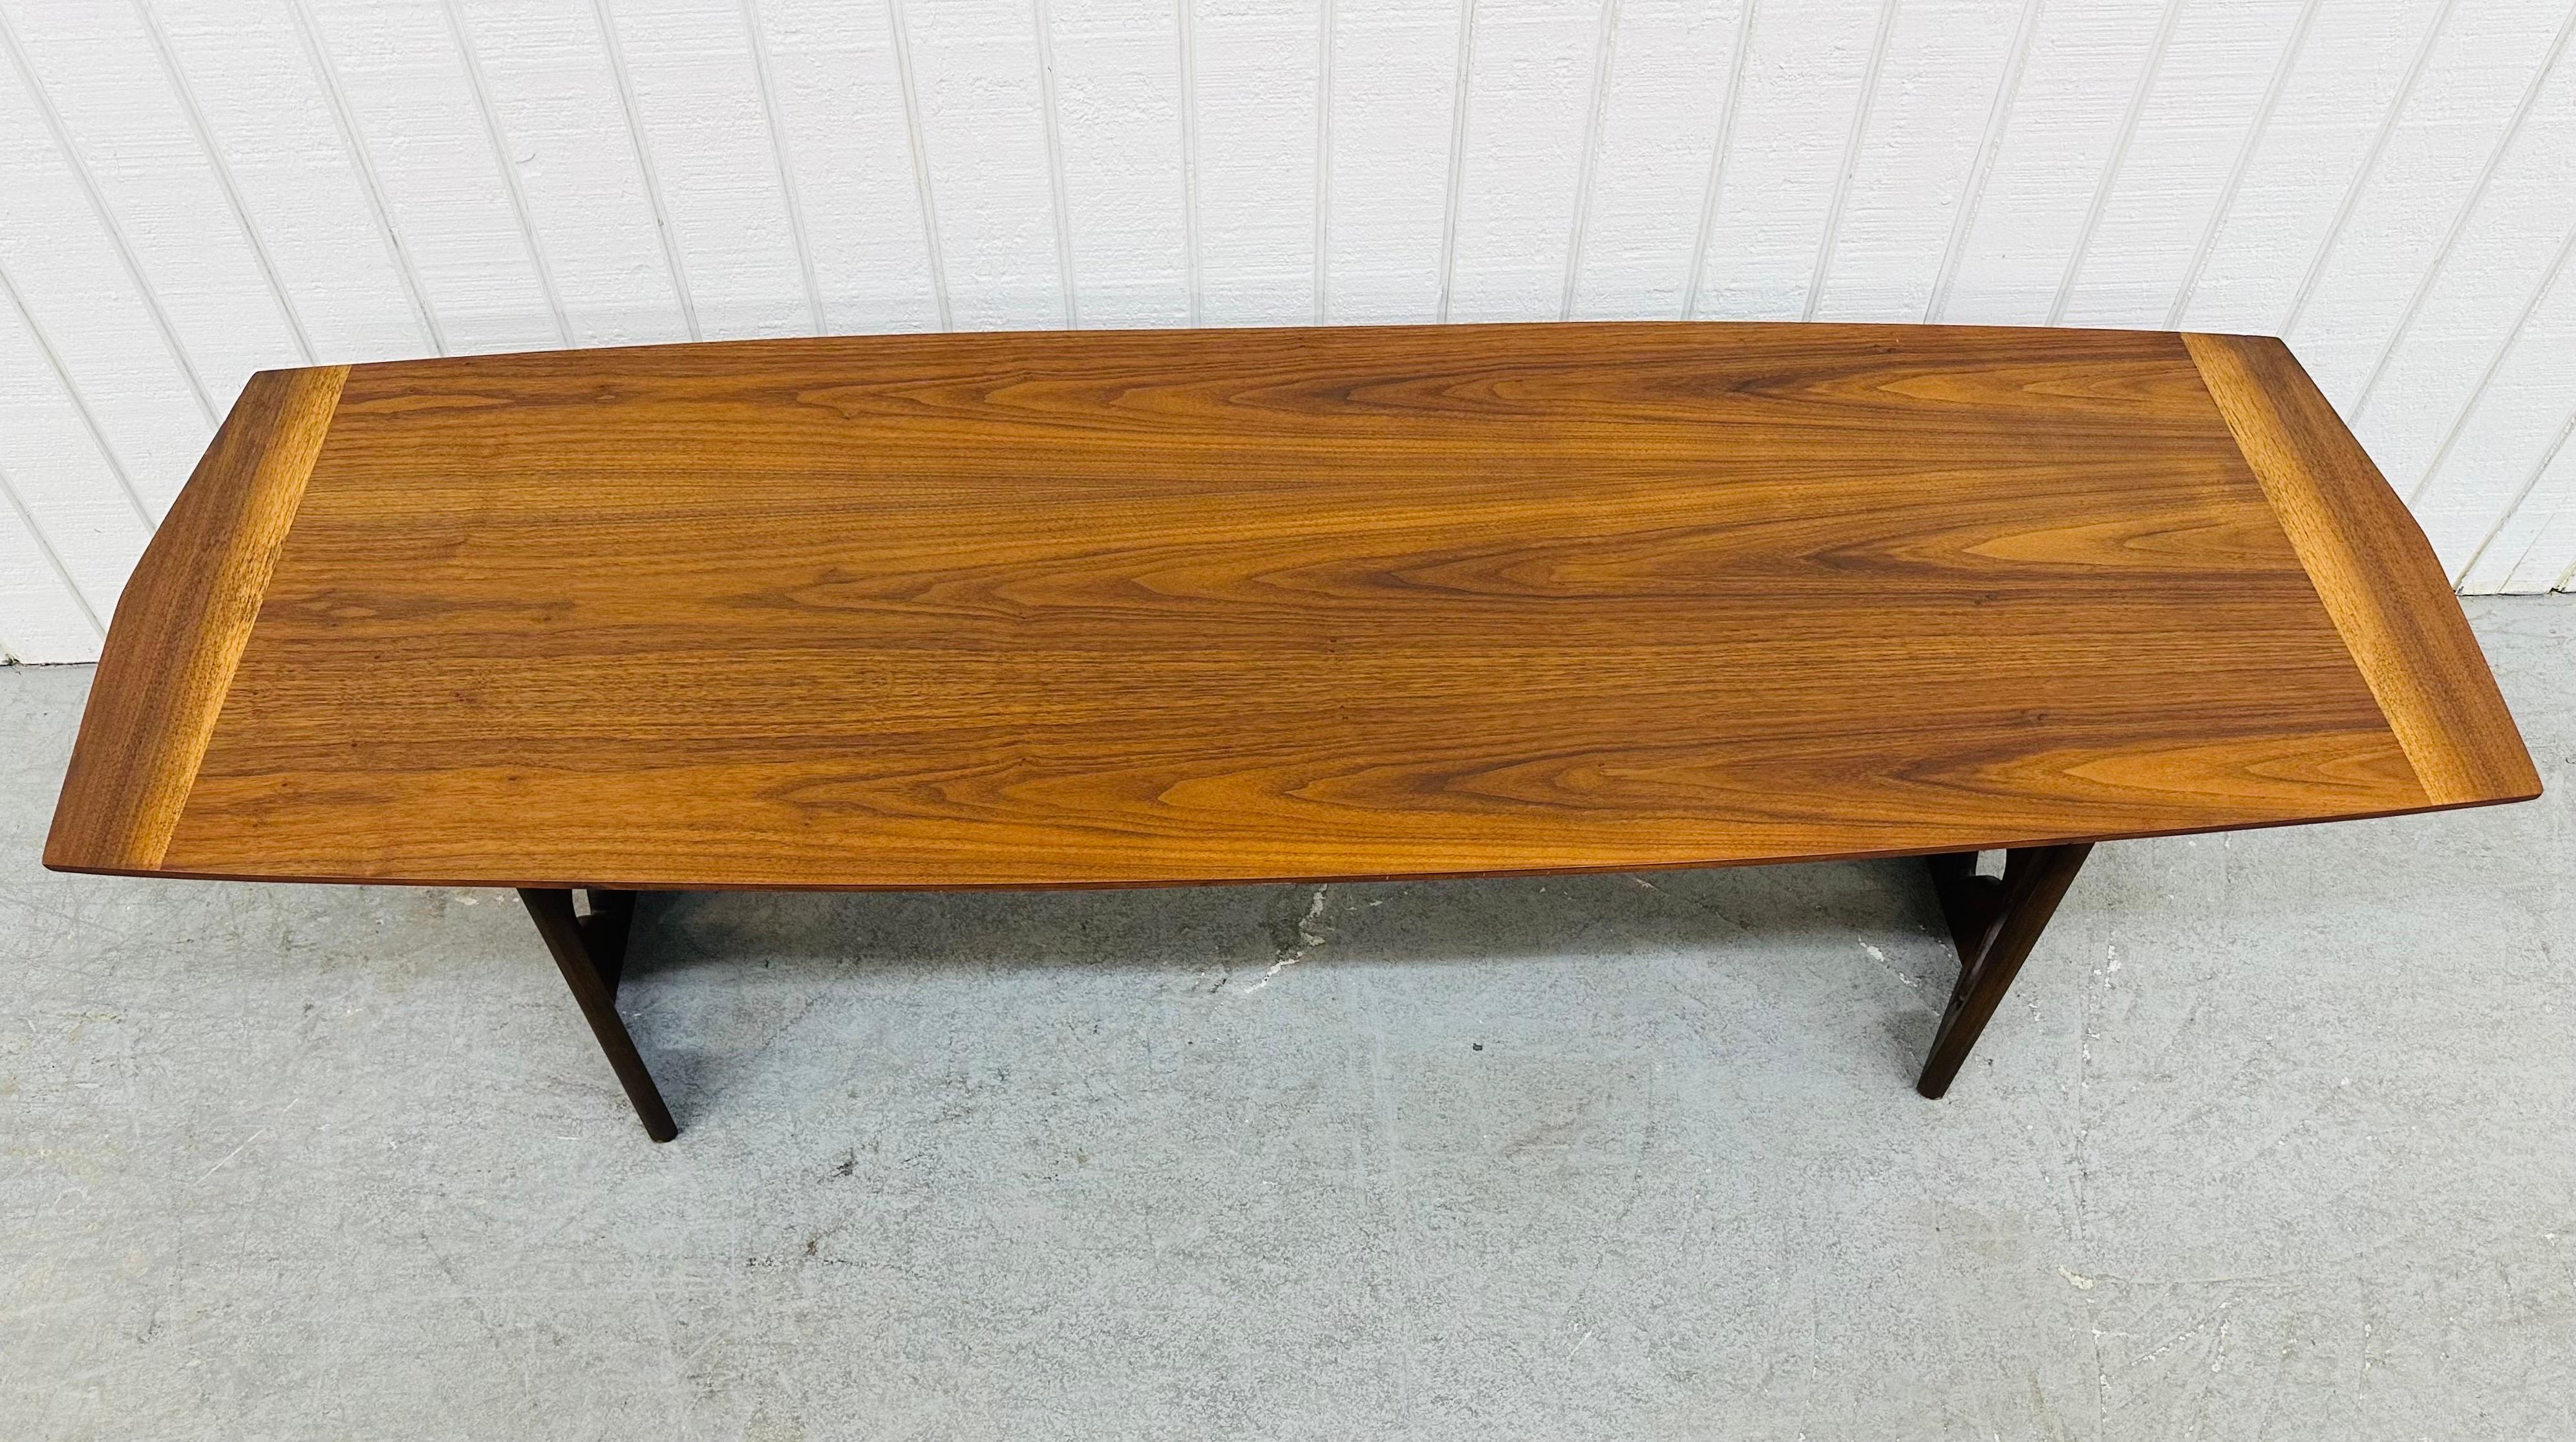 This listing is for a Mid-Century Modern Walnut Coffee Table. Featuring a surfboard style top, matching sculpted base on each side, and a beautiful walnut finish. This is an exceptional combination of quality and design!